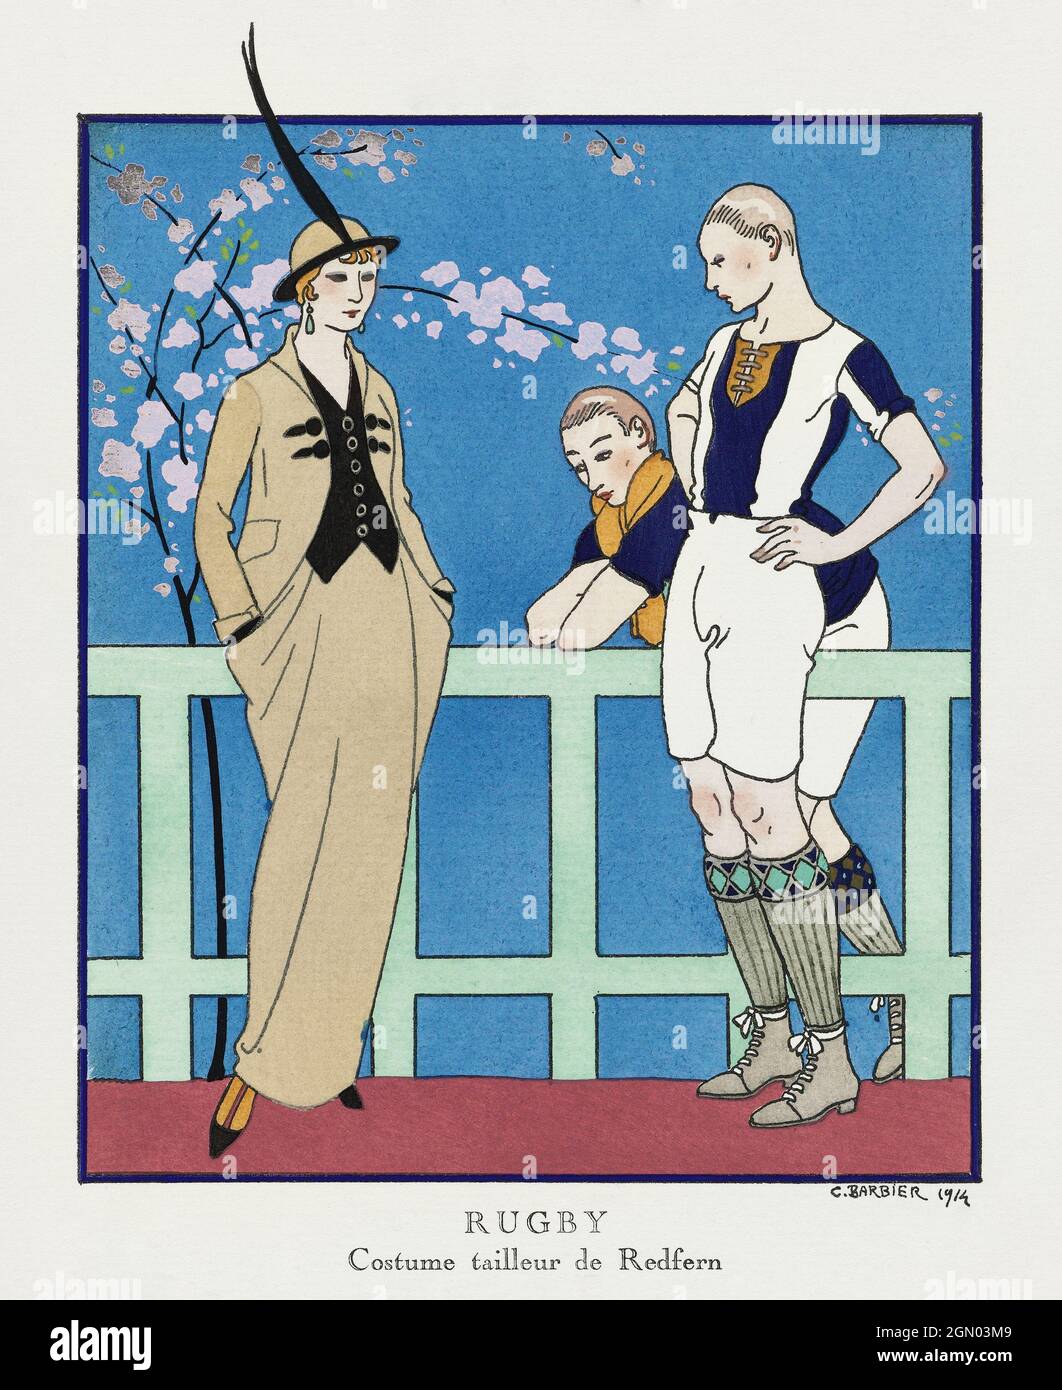 Rugby: Costume tailleur de Redfern from Gazette du Bon Ton No. 4 Pl. 39 (1914) fashion illustration in high resolution by George Barbier. Stock Photo